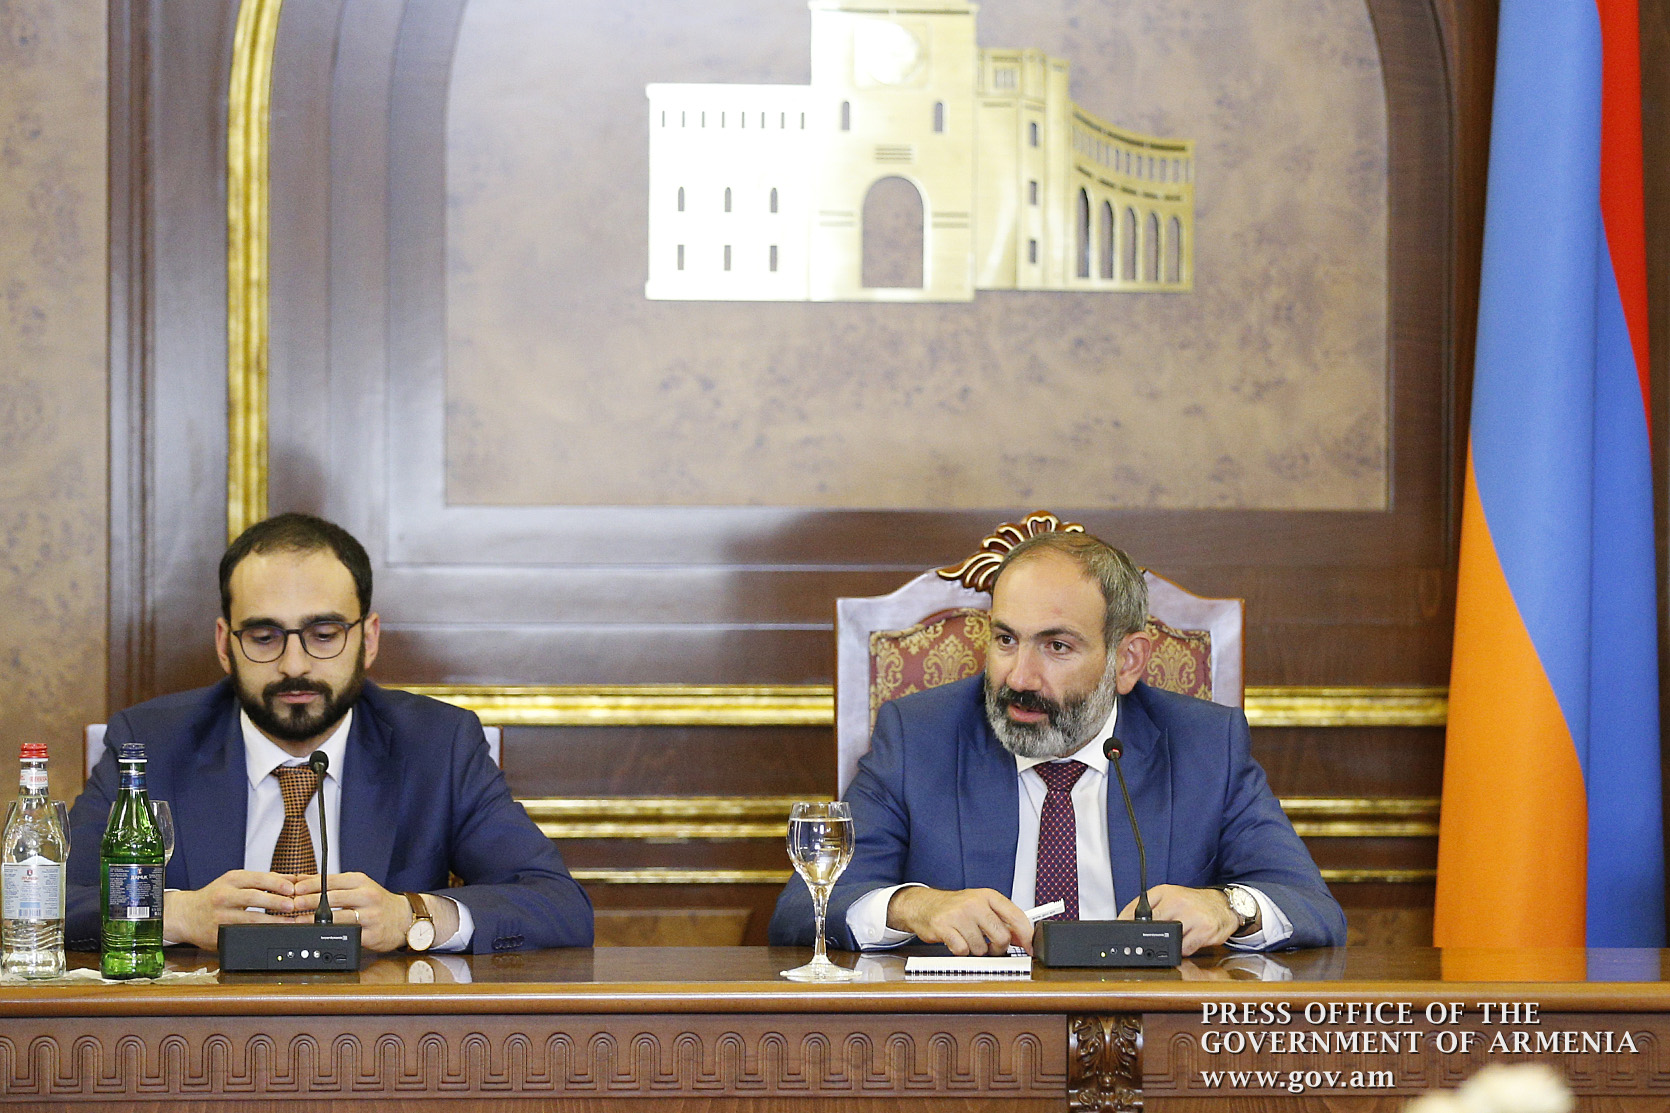 ‘Everyone, especially our compatriots, are invited to invest in Armenia’ – PM welcomes Russia-based Armenian businessmen